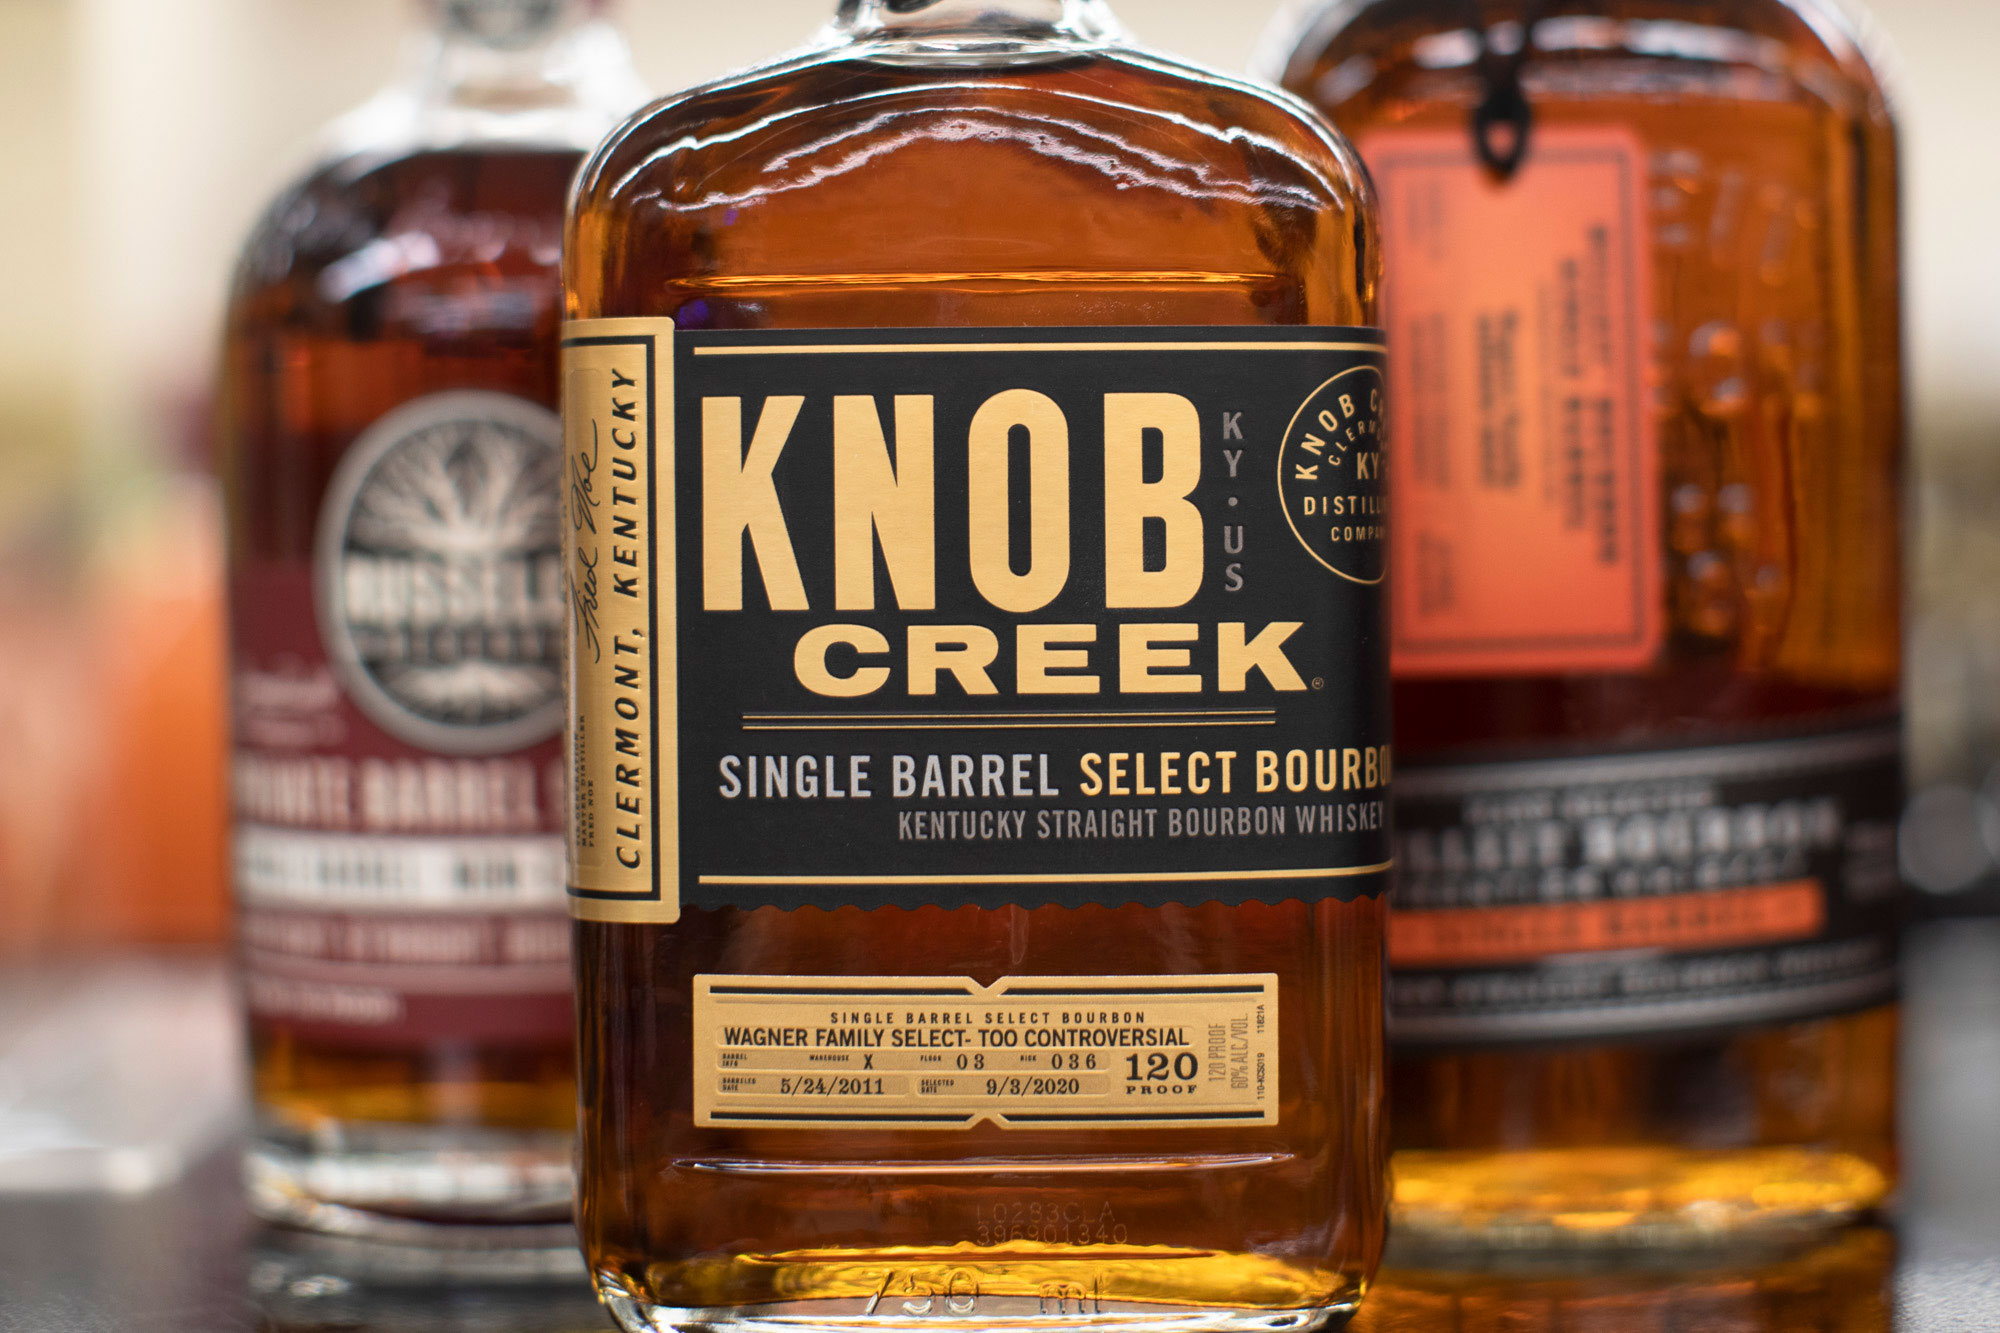 Knob Creek bourbon with Bulleit and Russells Bourbon in background